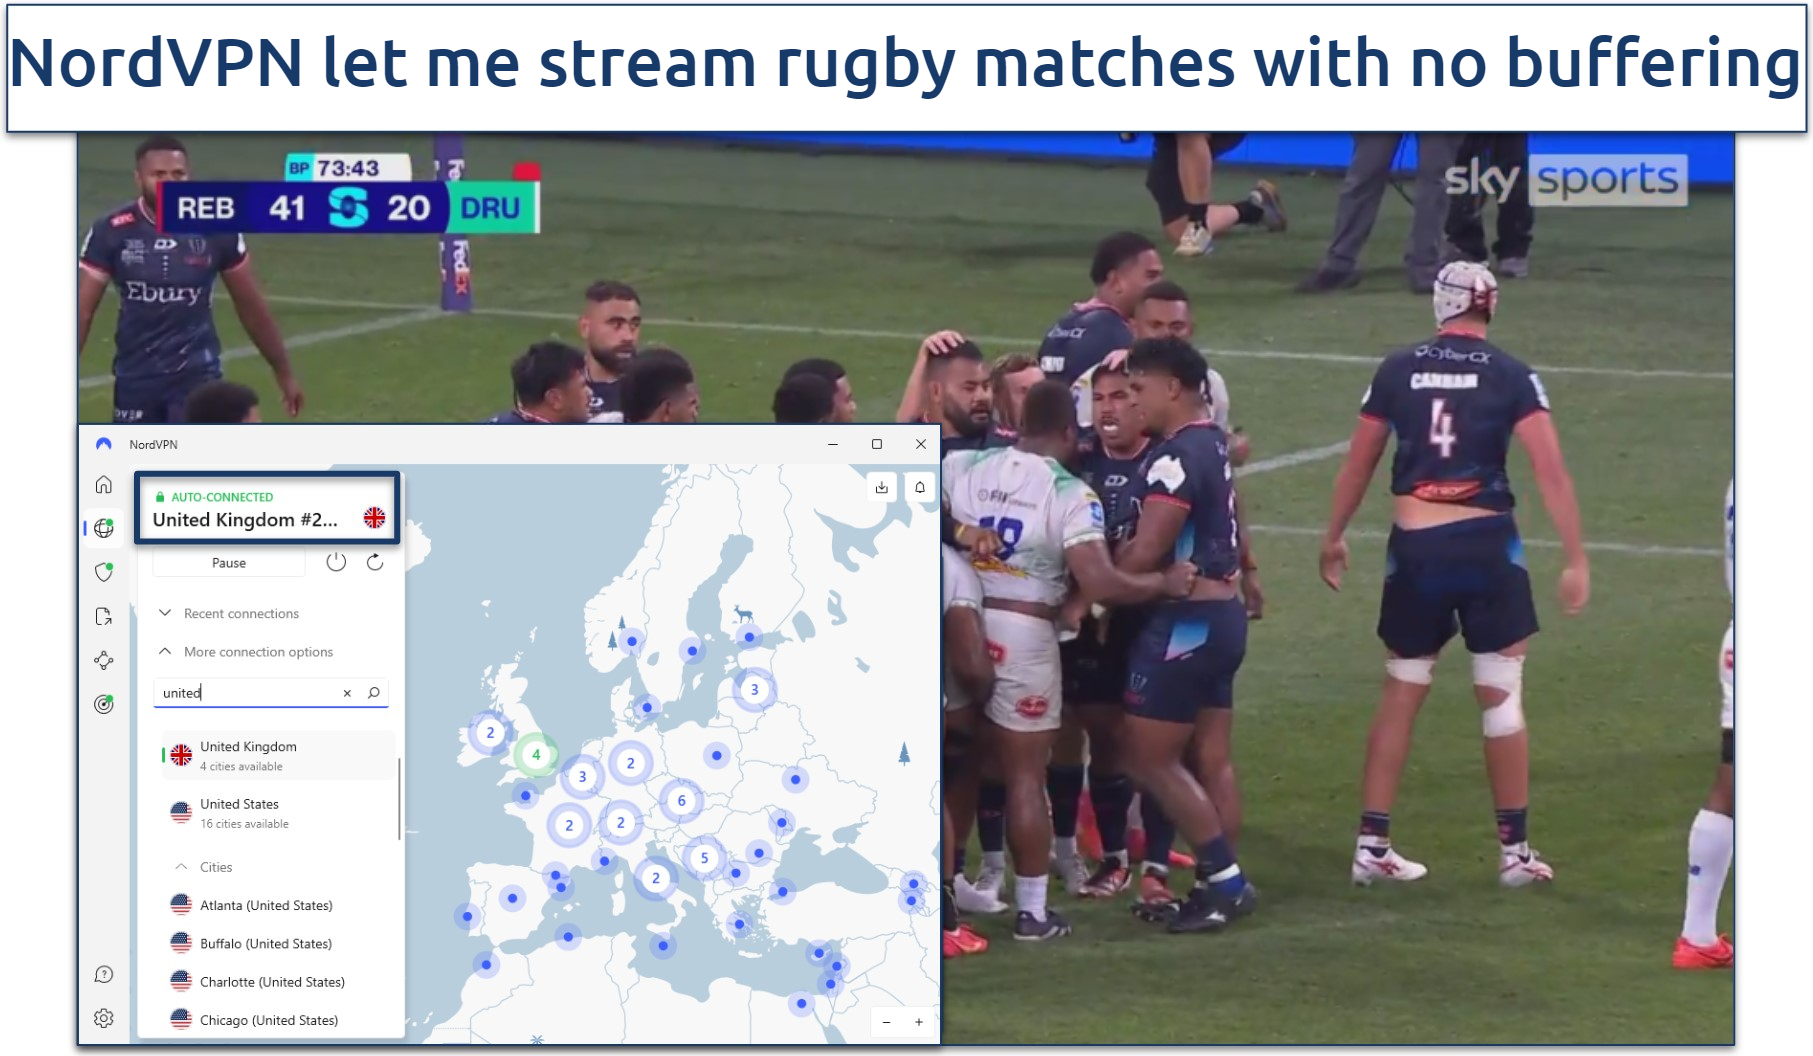 Screenshot of rugby game on Sky Sports with NordVPN UK server